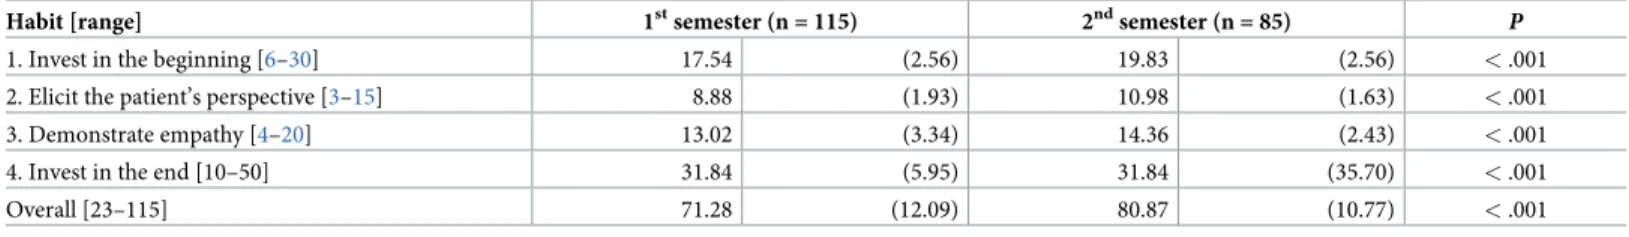 Table 3. Comparison of 4-Habit Coding Scheme scores for medical student consultations recorded during first and second semesters.